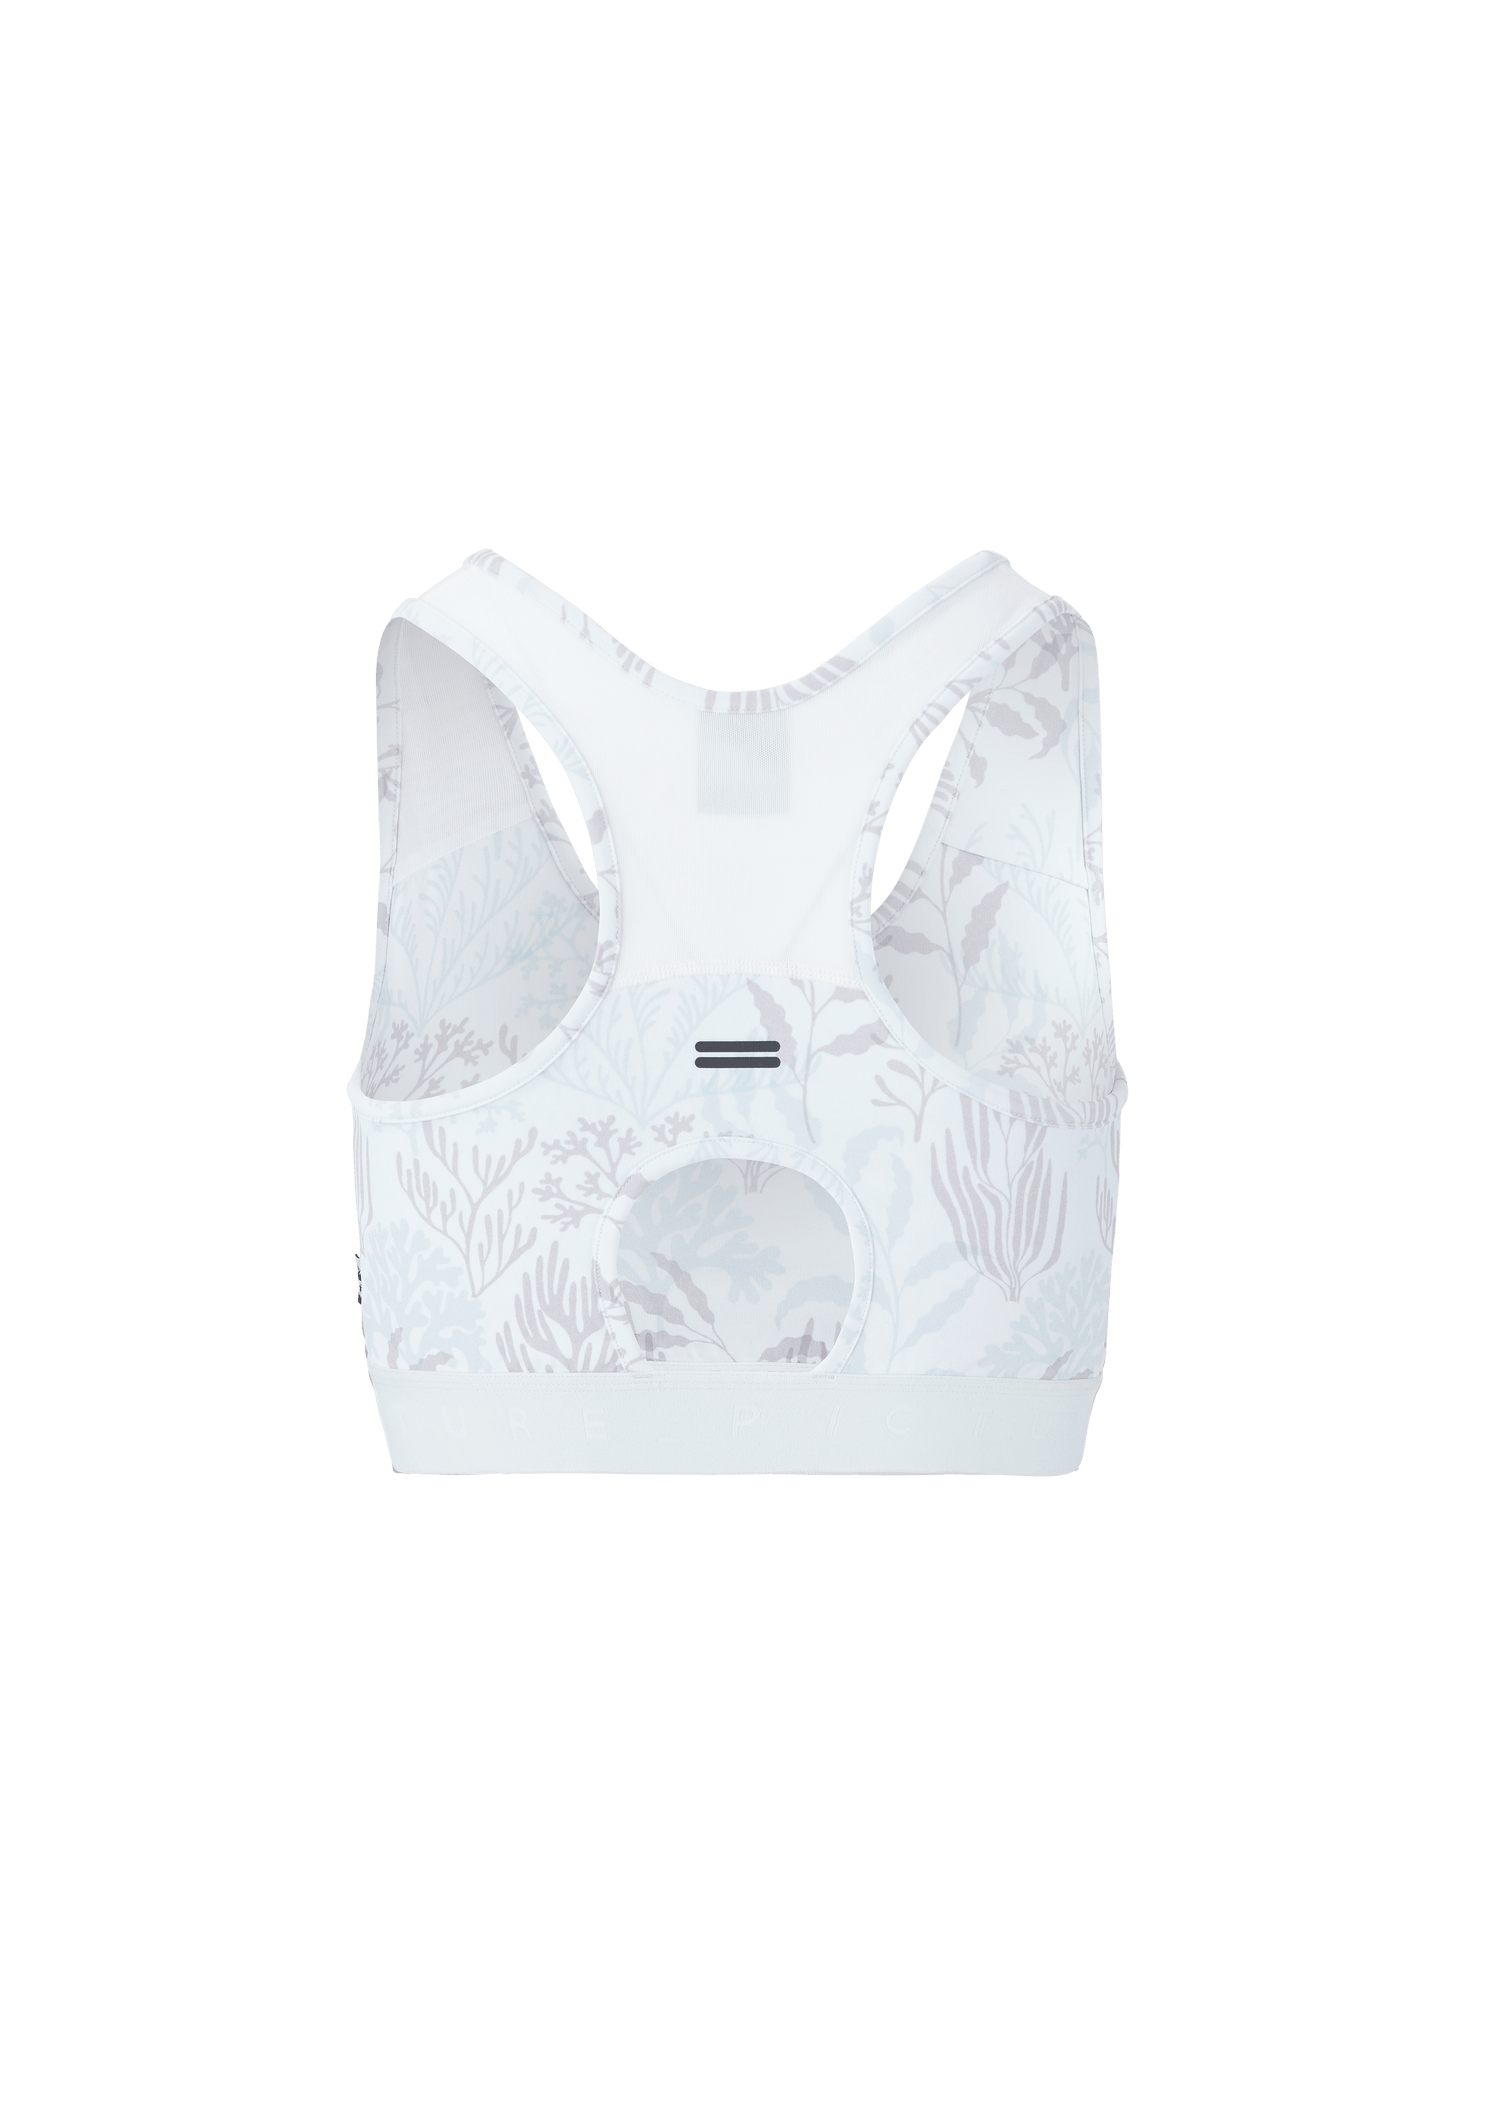 Picture Organic Women's Avasa Sports Bra - Recycled Polyester